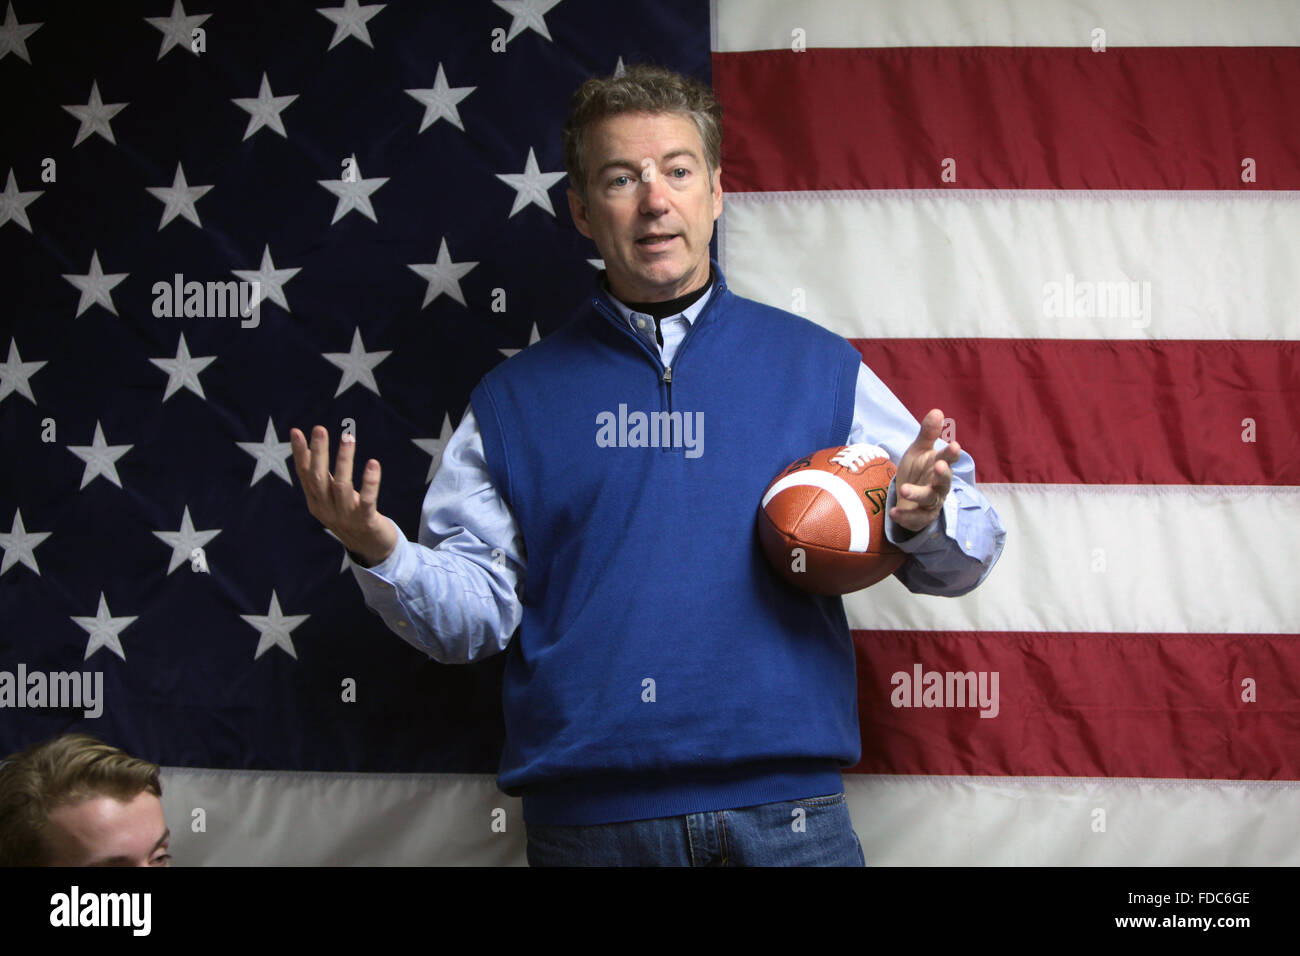 Senator Rand Paul and GOP presidential candidate addresses campaign volunteers while holding a football January 22, 2016 in Manchester, New Hampshire. Stock Photo